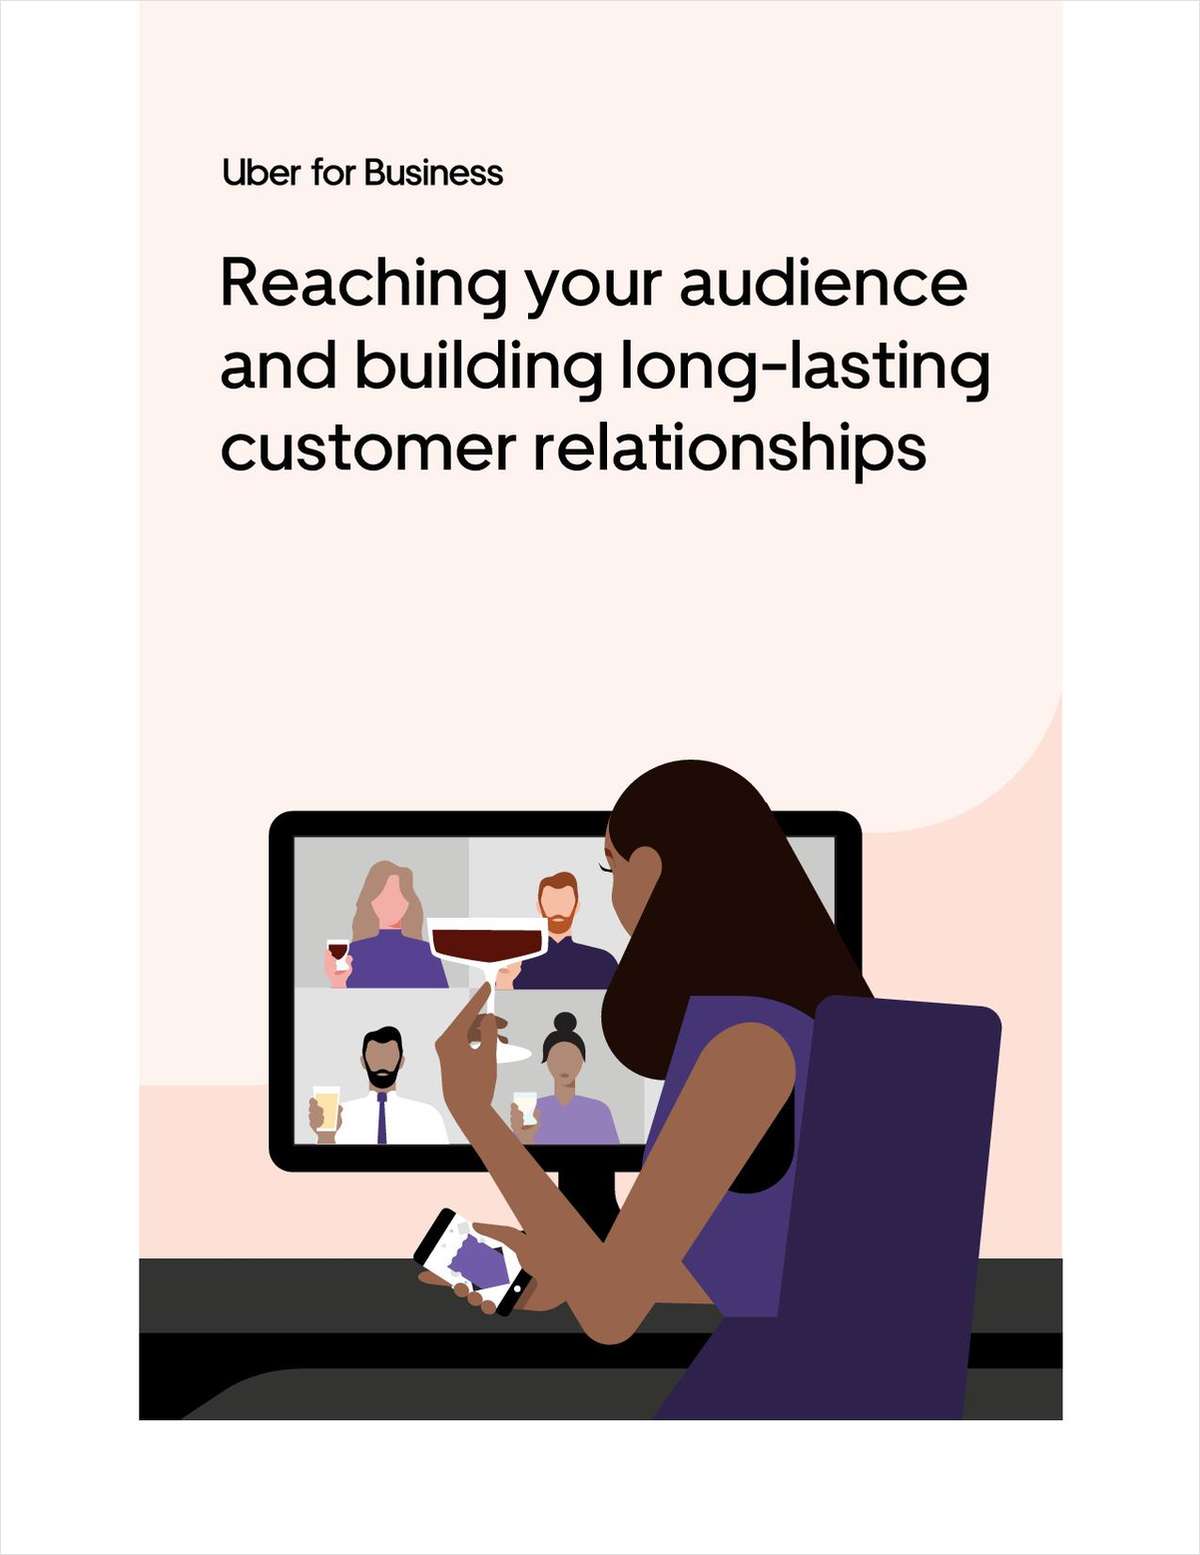 Reaching your audience and building long-lasting customer relationships